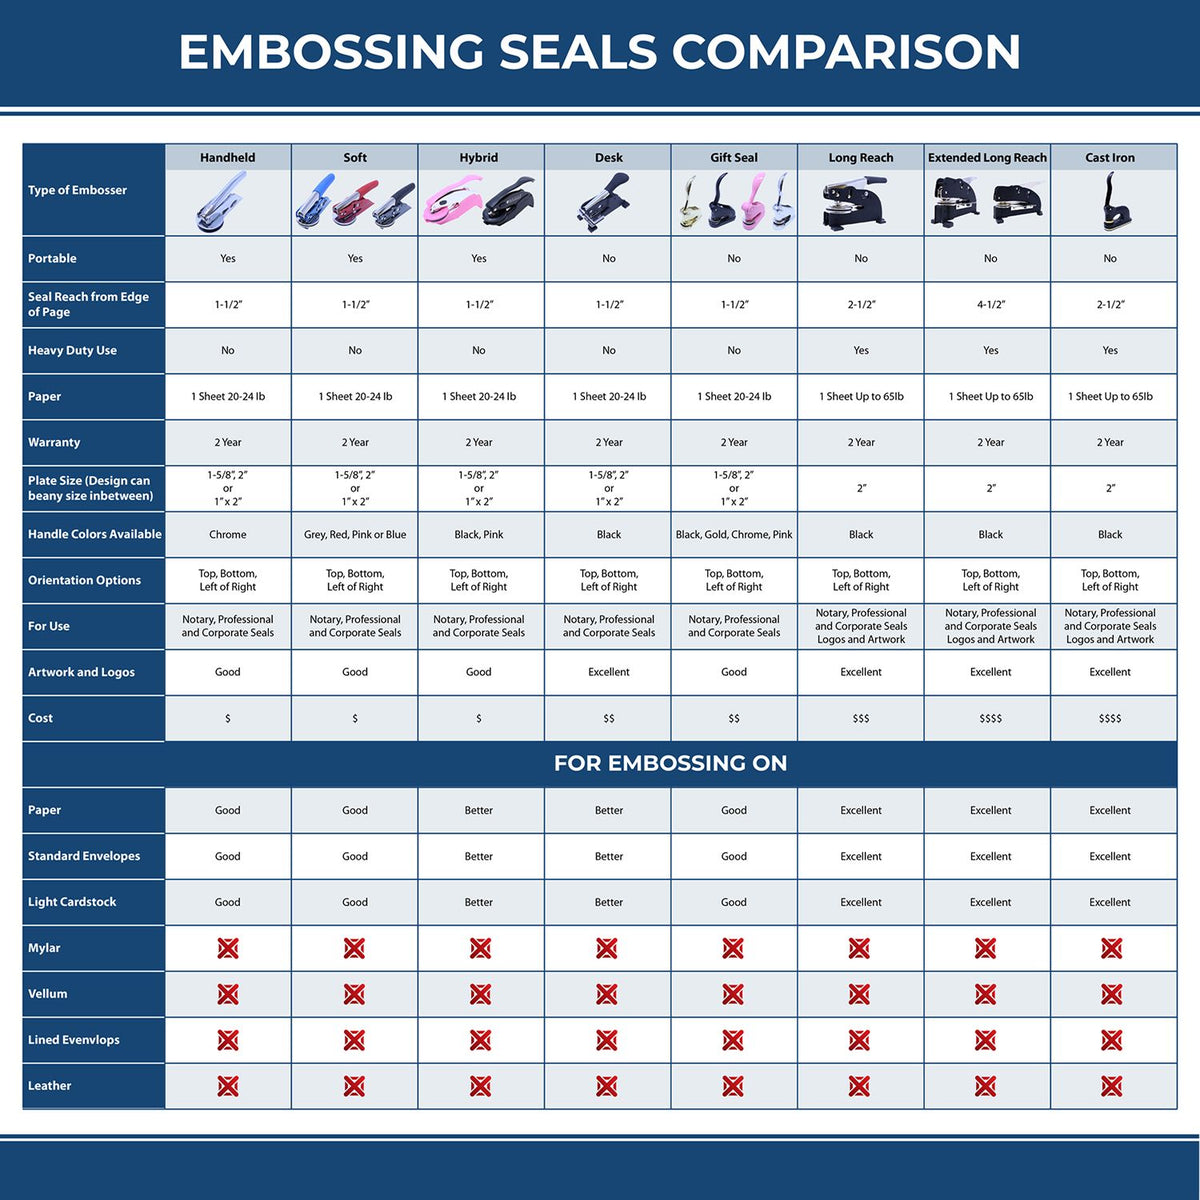 A comparison chart for the different types of mount models available for the Handheld Hawaii Professional Geologist Embosser